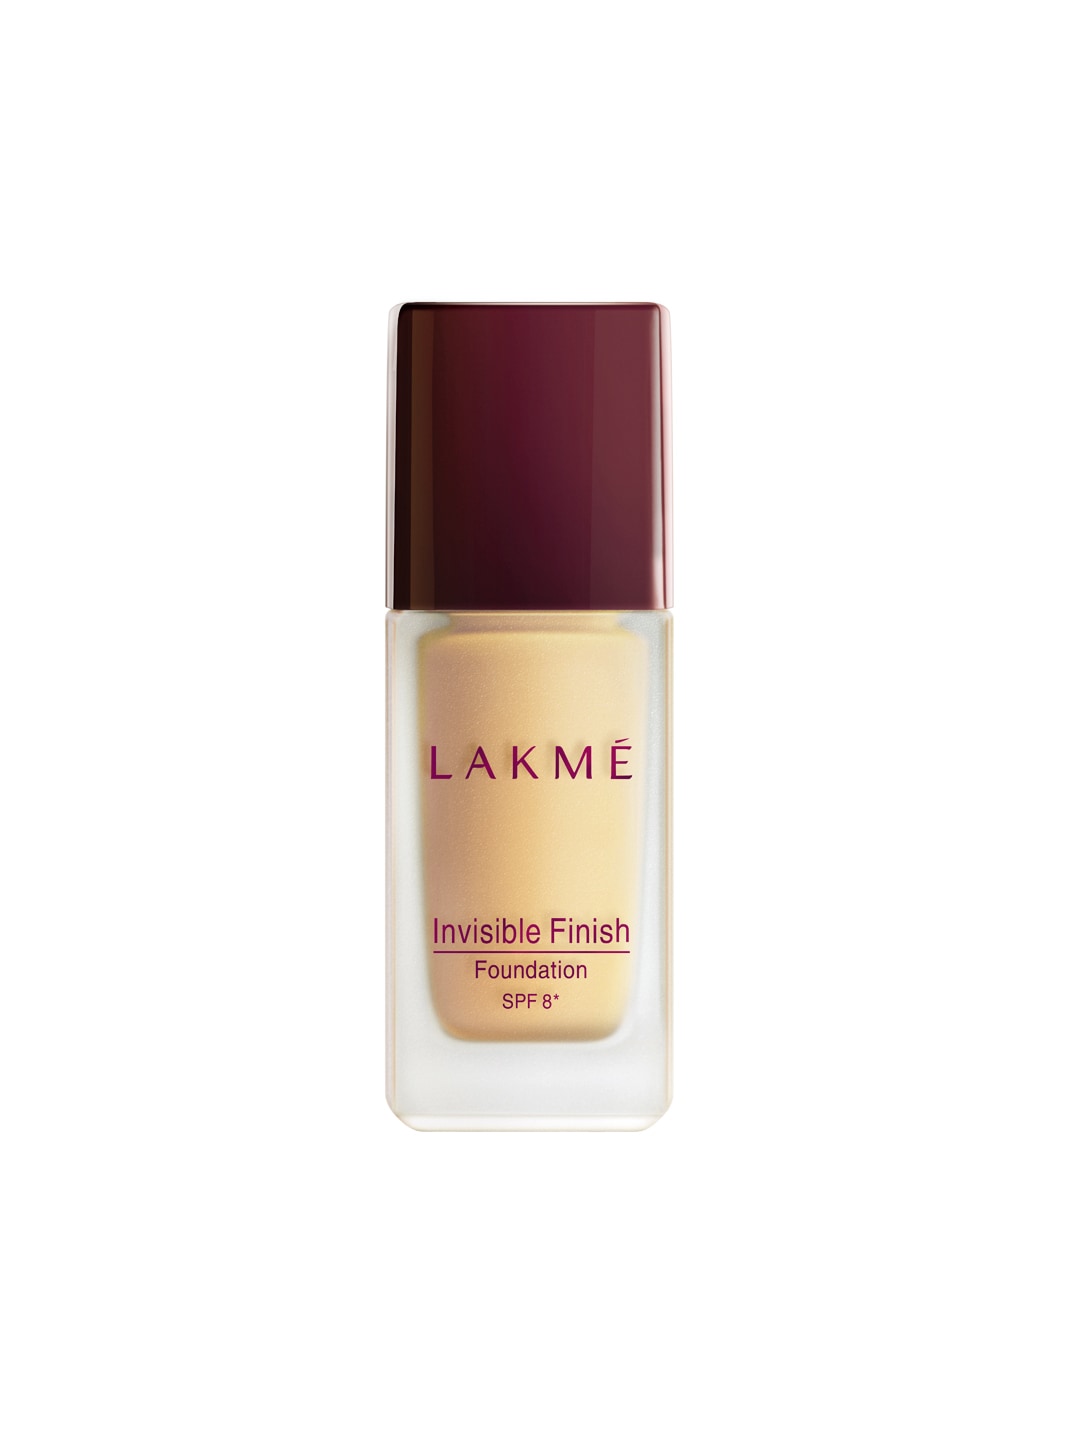 Lakme Invisible Finish Foundation - 02 25ml Price in India